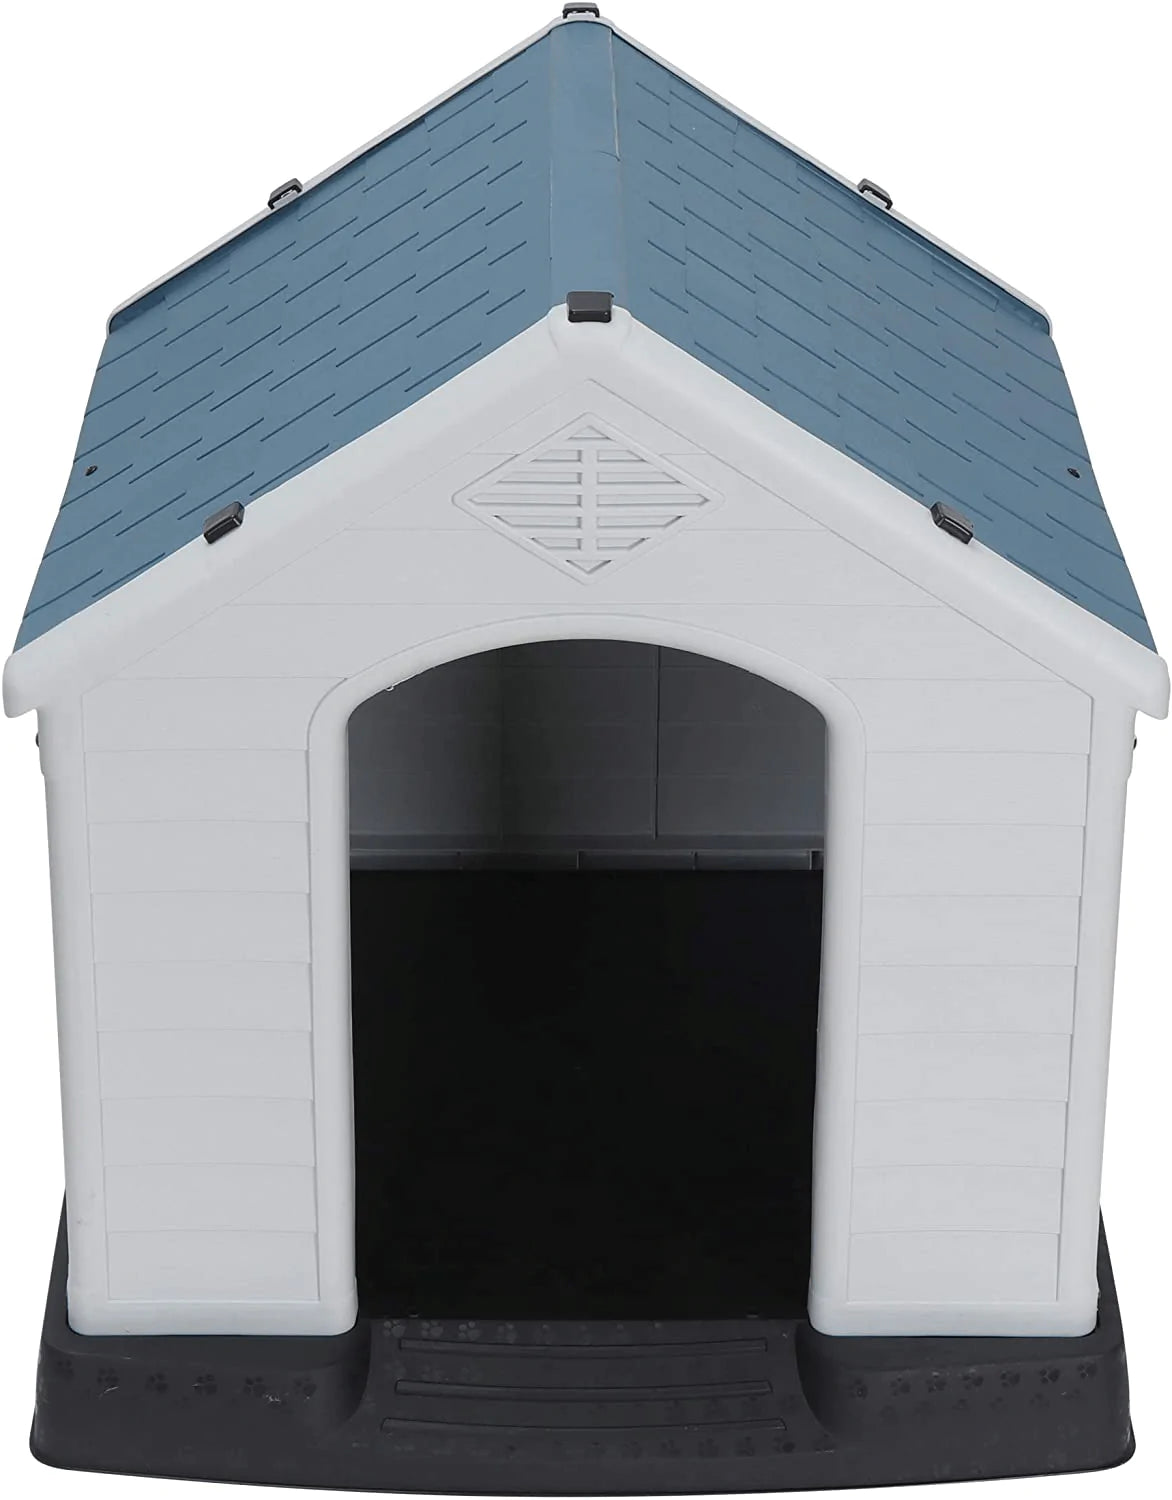 ZENY Plastic Dog House - Water Resistant Dog Kennel for Small to Medium Sized Dogs All Weather Indoor Outdoor Doghouse Puppy Shelter